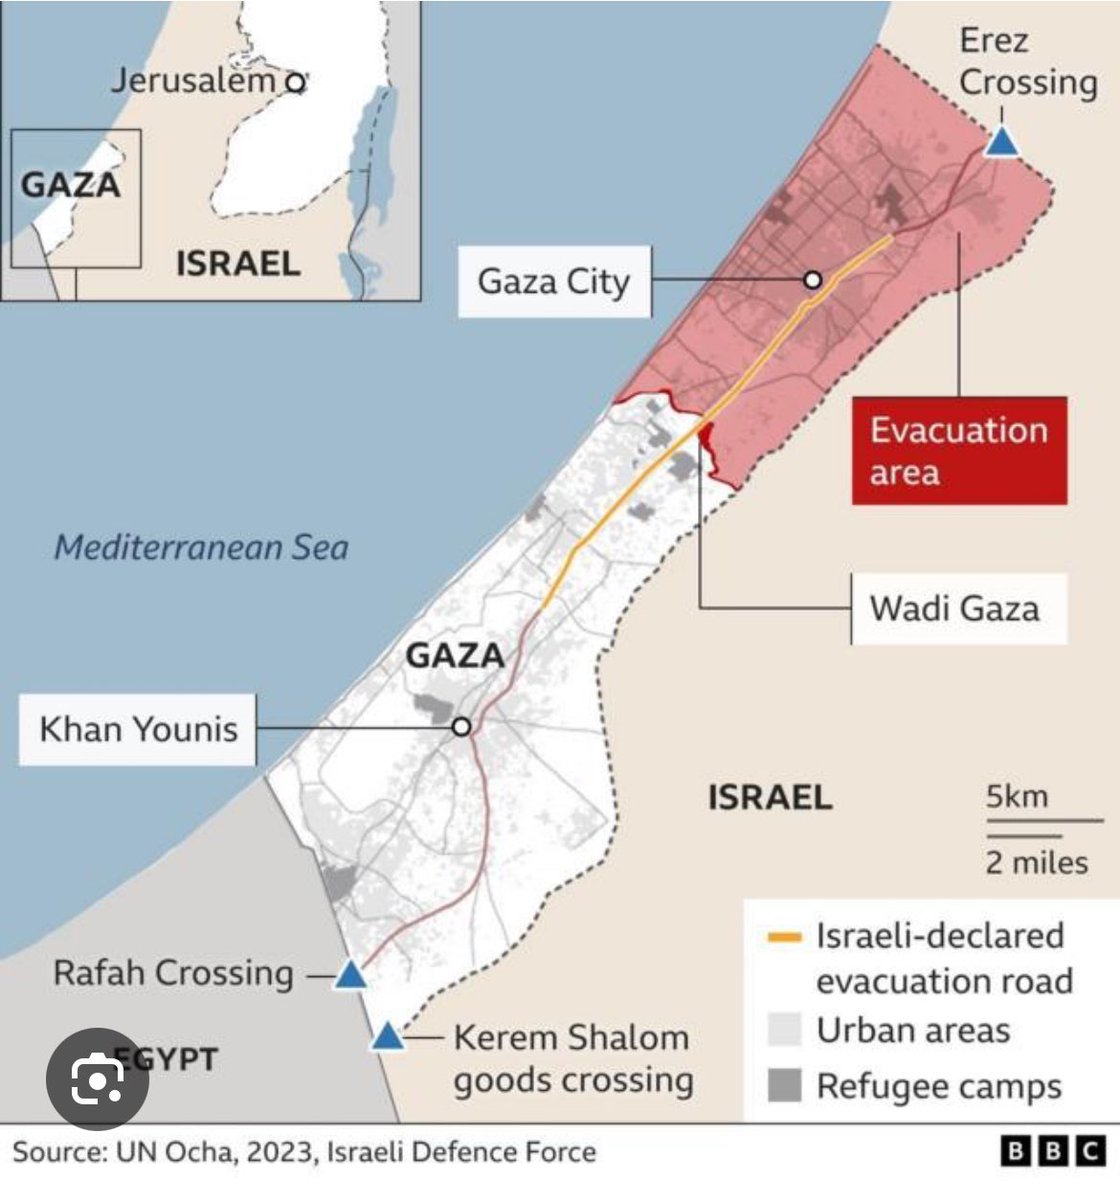 For #Israel to enter East #Rafah, it needs #Egypt's permission because Israeli occupation forces are walking on Egyptian borders where they are not allowed in large numbers under the 1979 peace treaty.